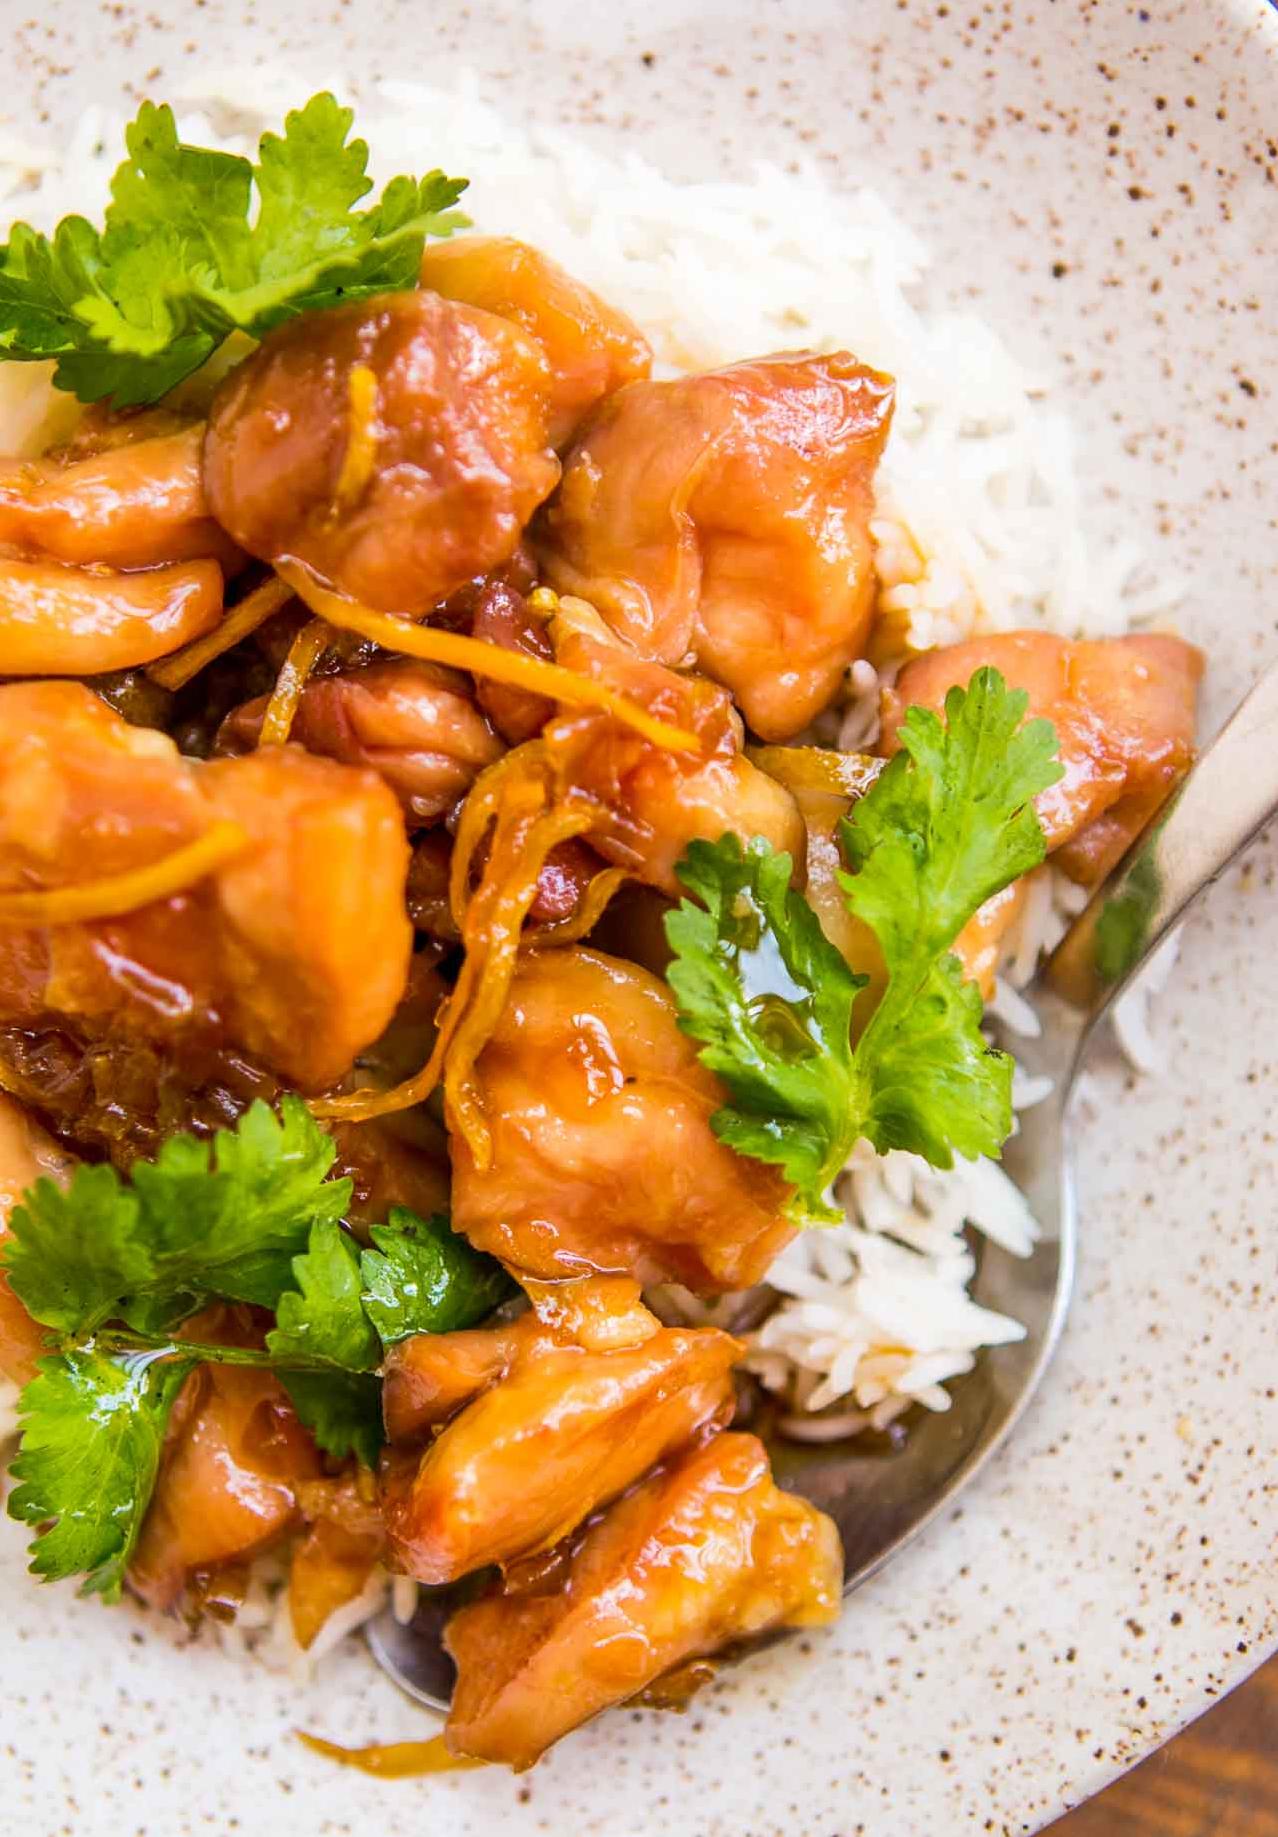  This chicken is so tender and juicy, you'll want to lick the caramel-ginger sauce off the plate.